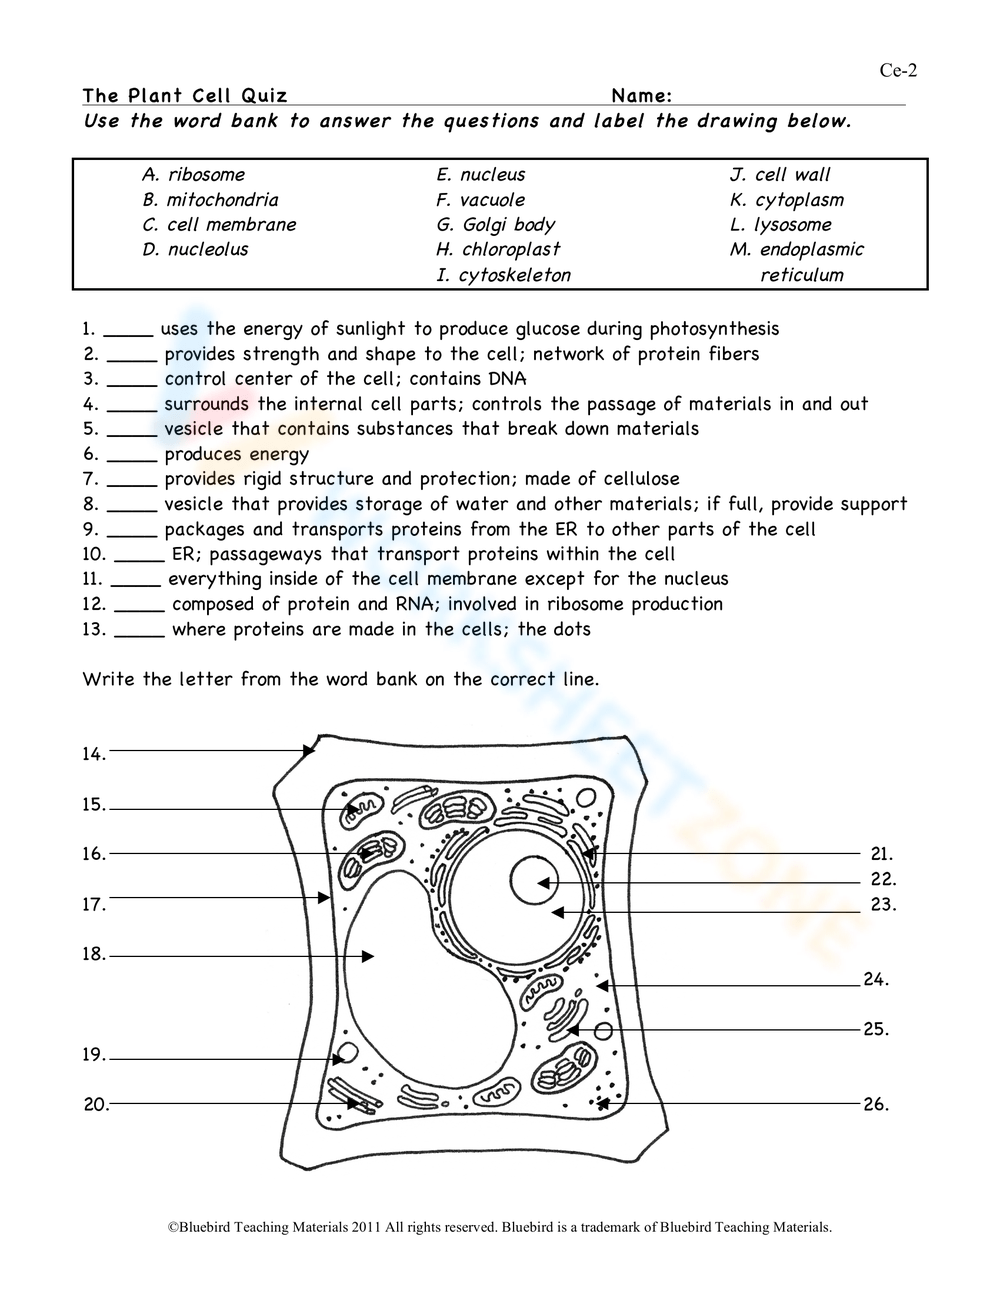 The Plant Cell Quiz